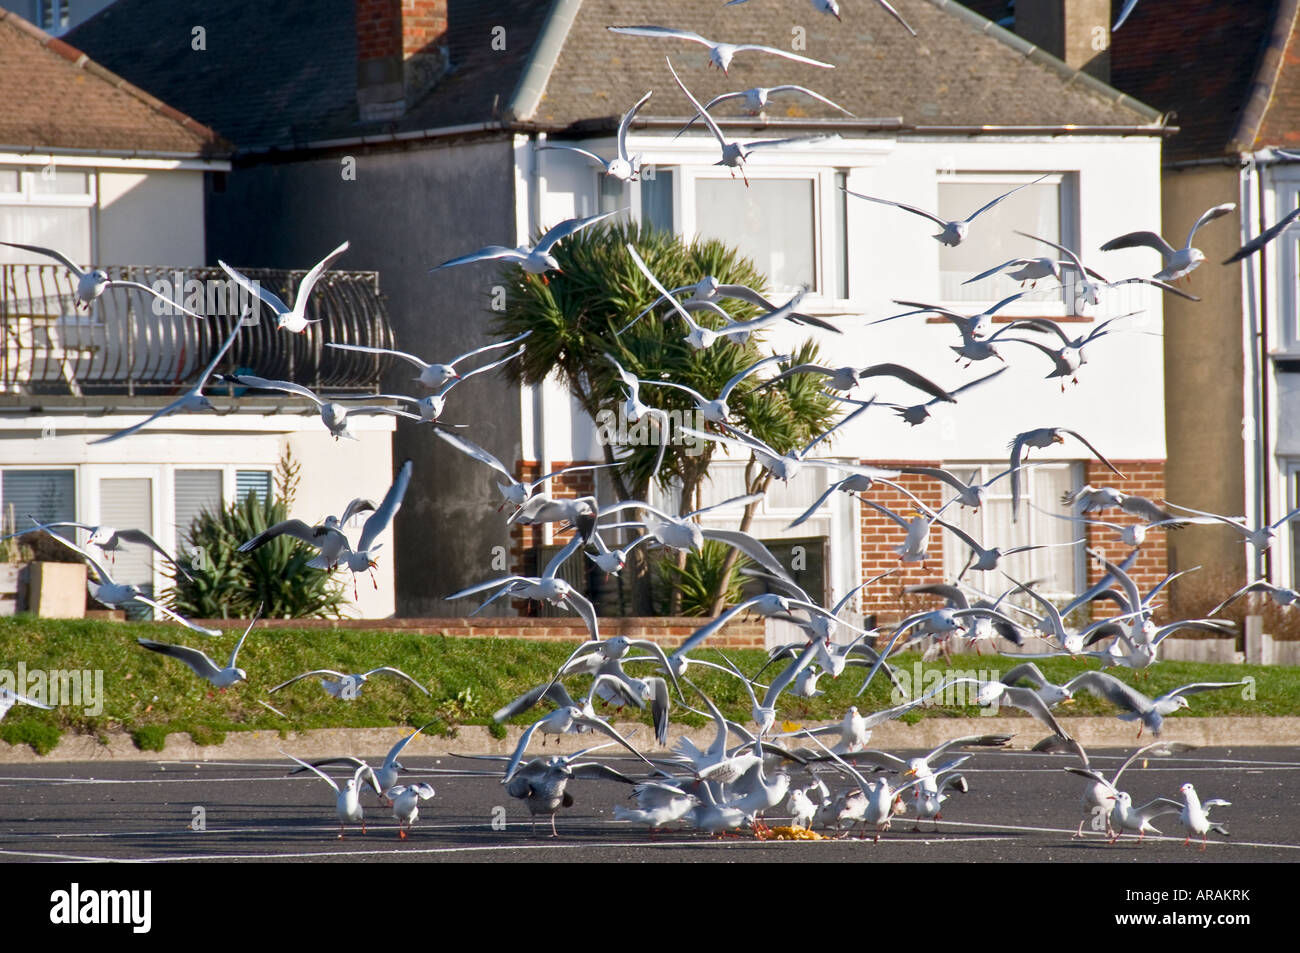 Seagulls Swooping on Discarded Chips Stock Photo